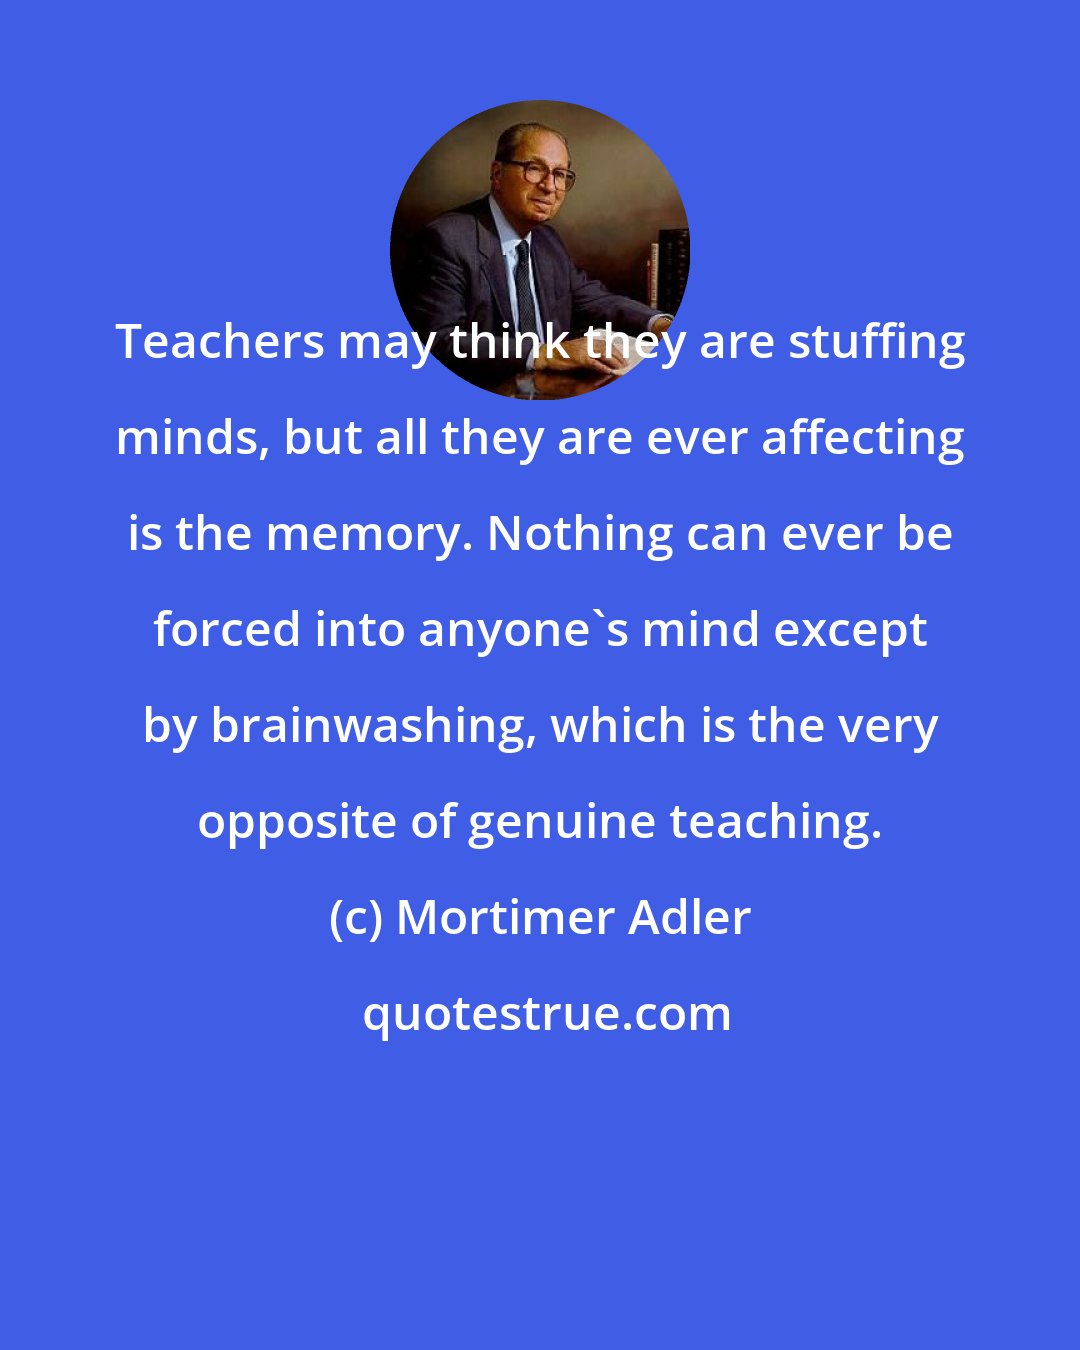 Mortimer Adler: Teachers may think they are stuffing minds, but all they are ever affecting is the memory. Nothing can ever be forced into anyone's mind except by brainwashing, which is the very opposite of genuine teaching.